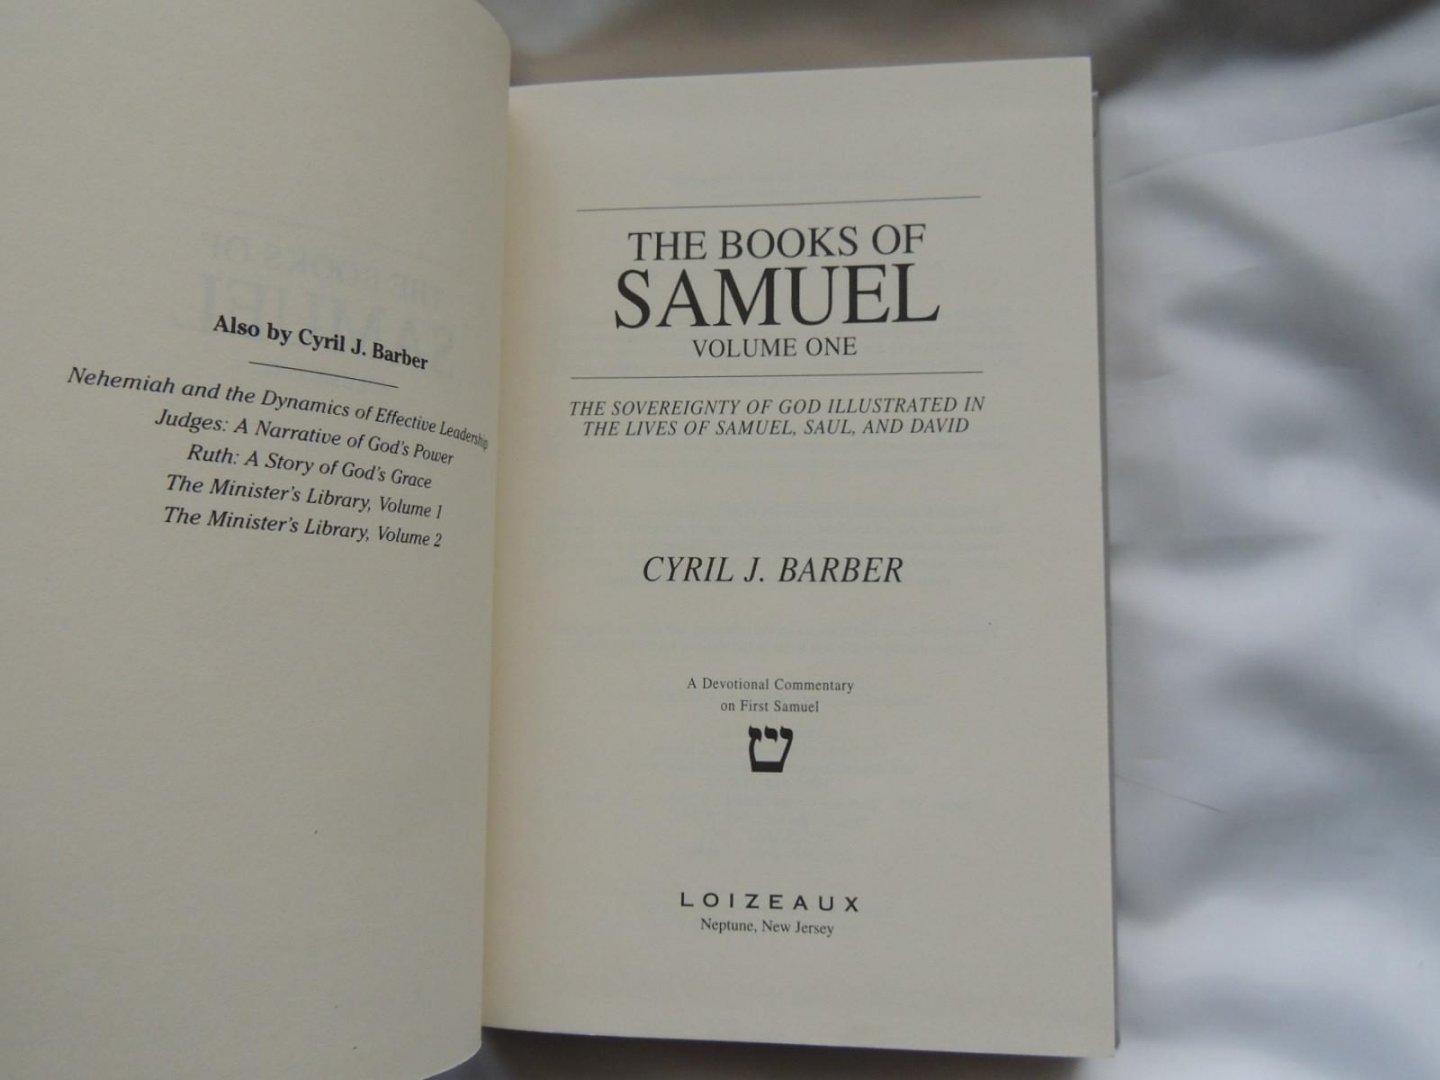 Cyril J Barber - The books of Samuel : the sovereignty of God illustrated in the lives of Samuel, Saul, and David  -- Volume 1. A devotional commentary on First Samuel.